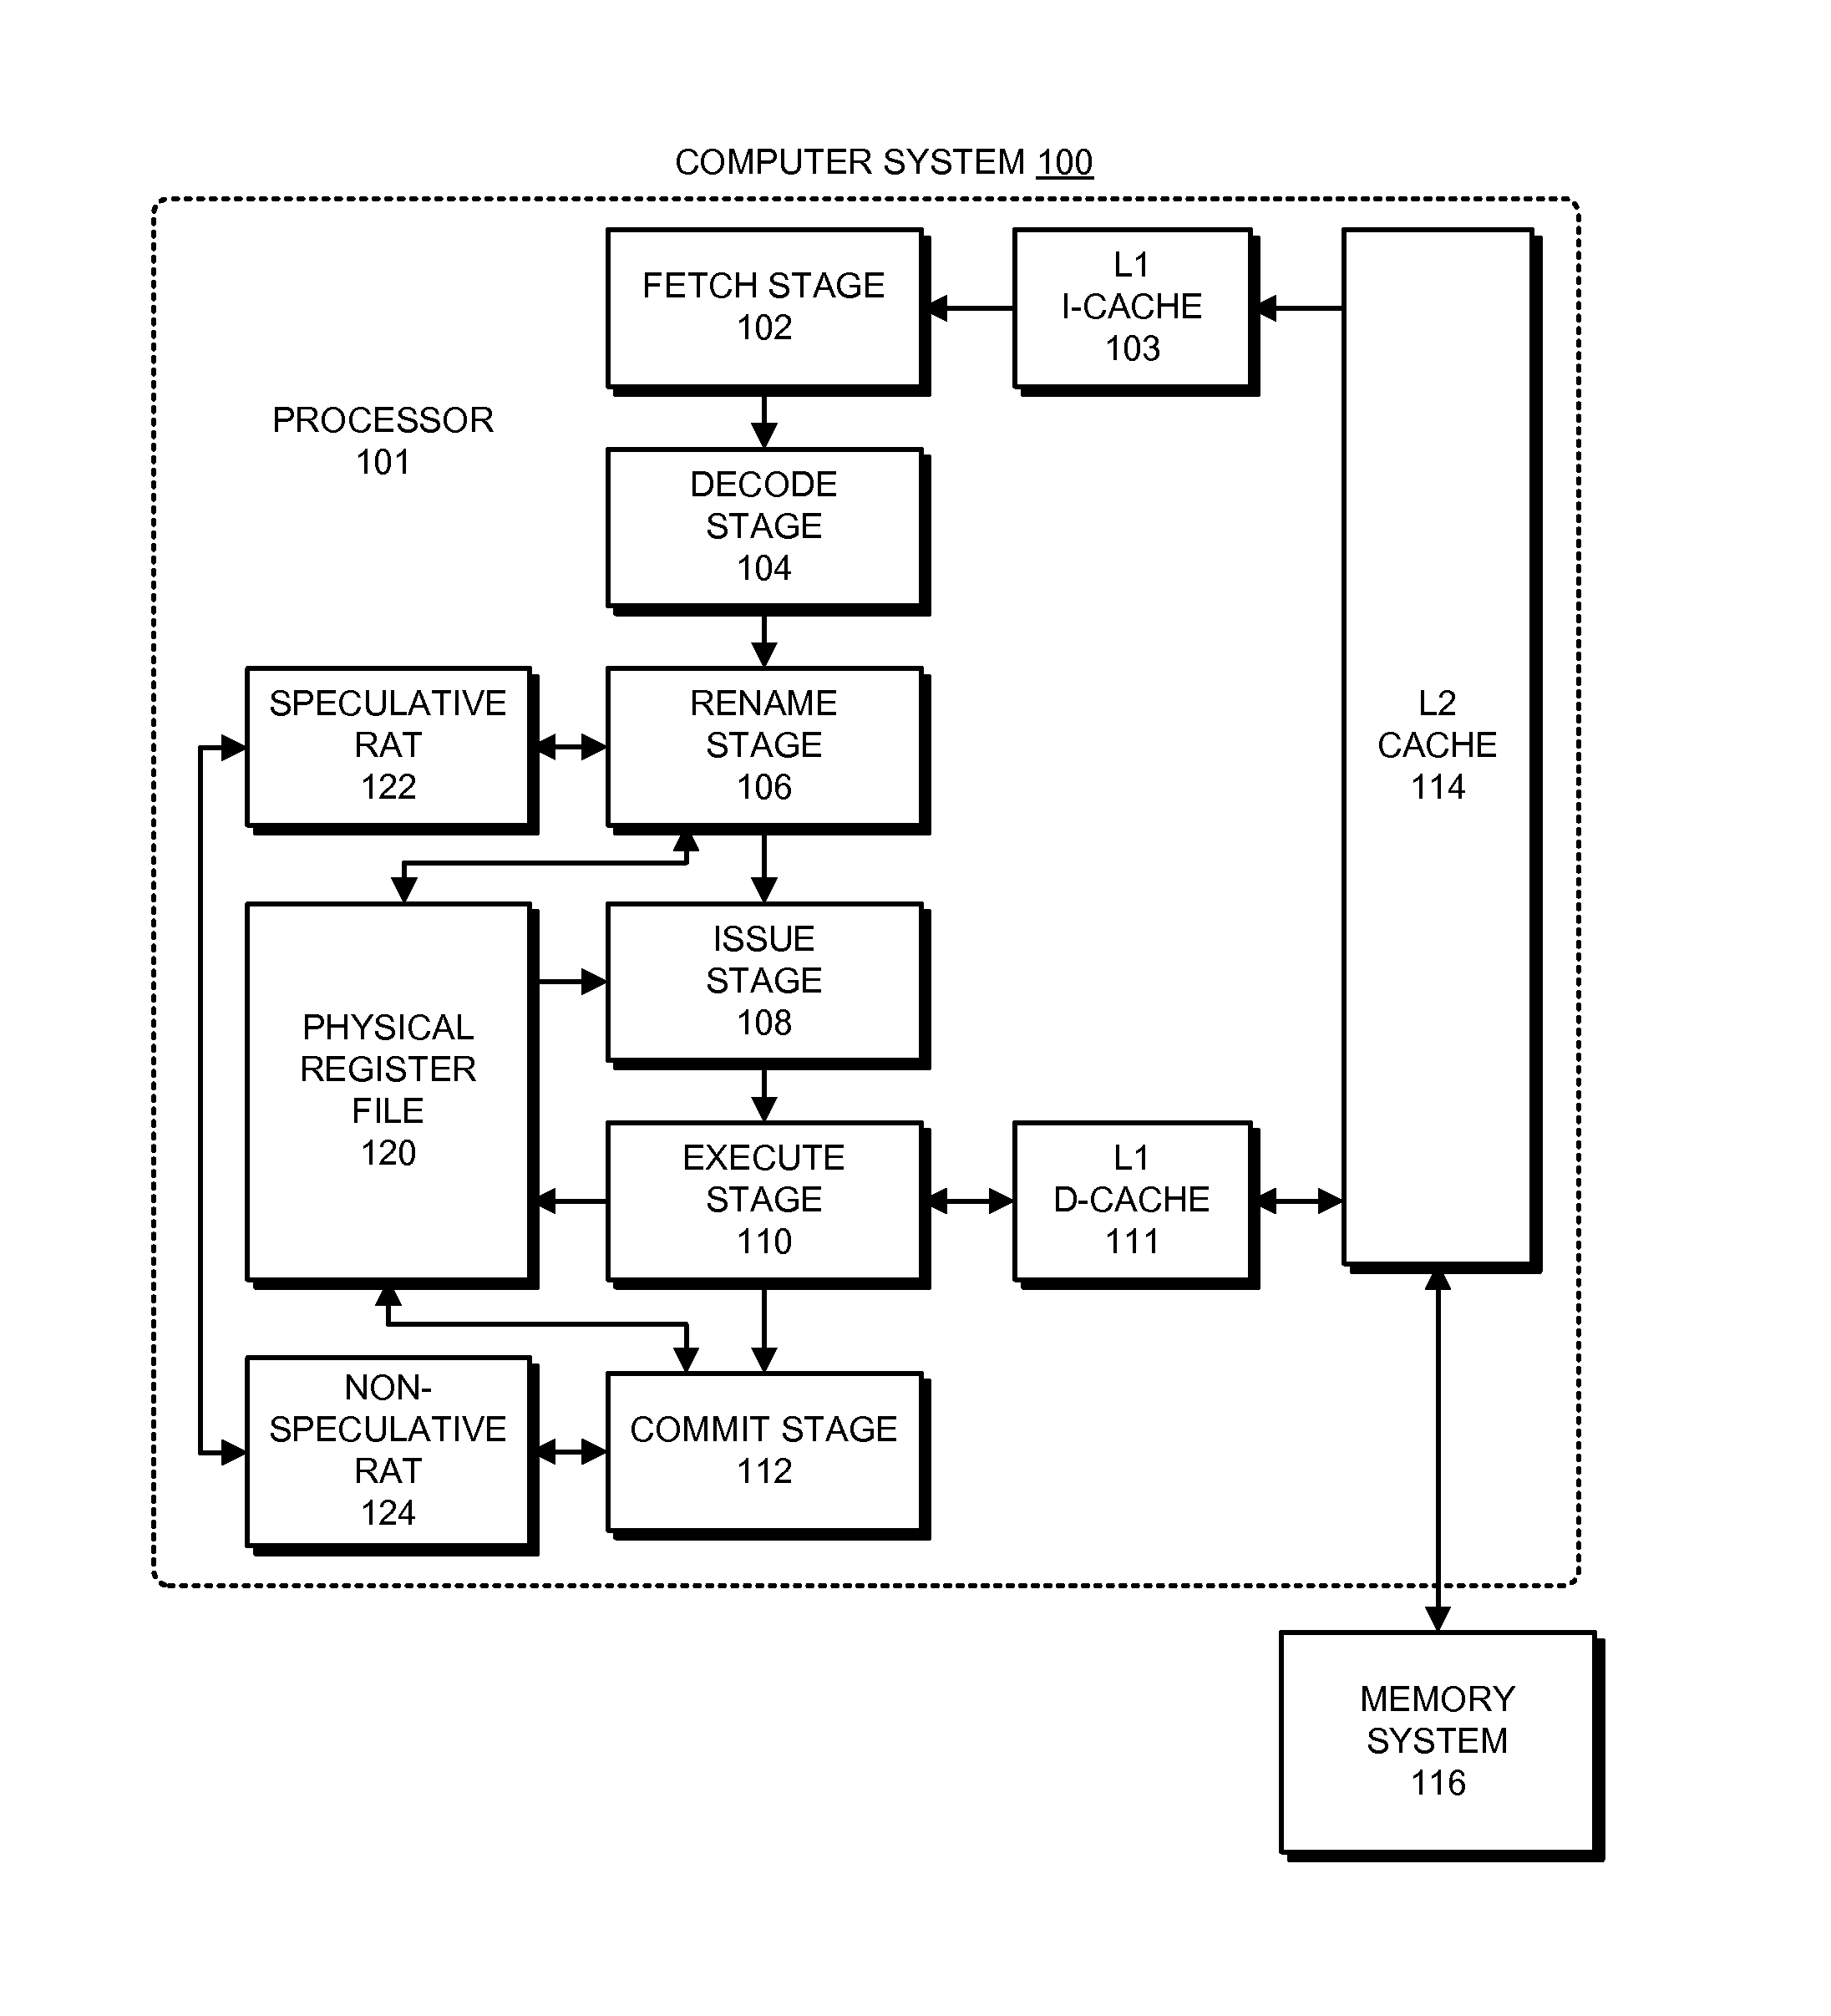 Processor efficiency by combining working and architectural register files